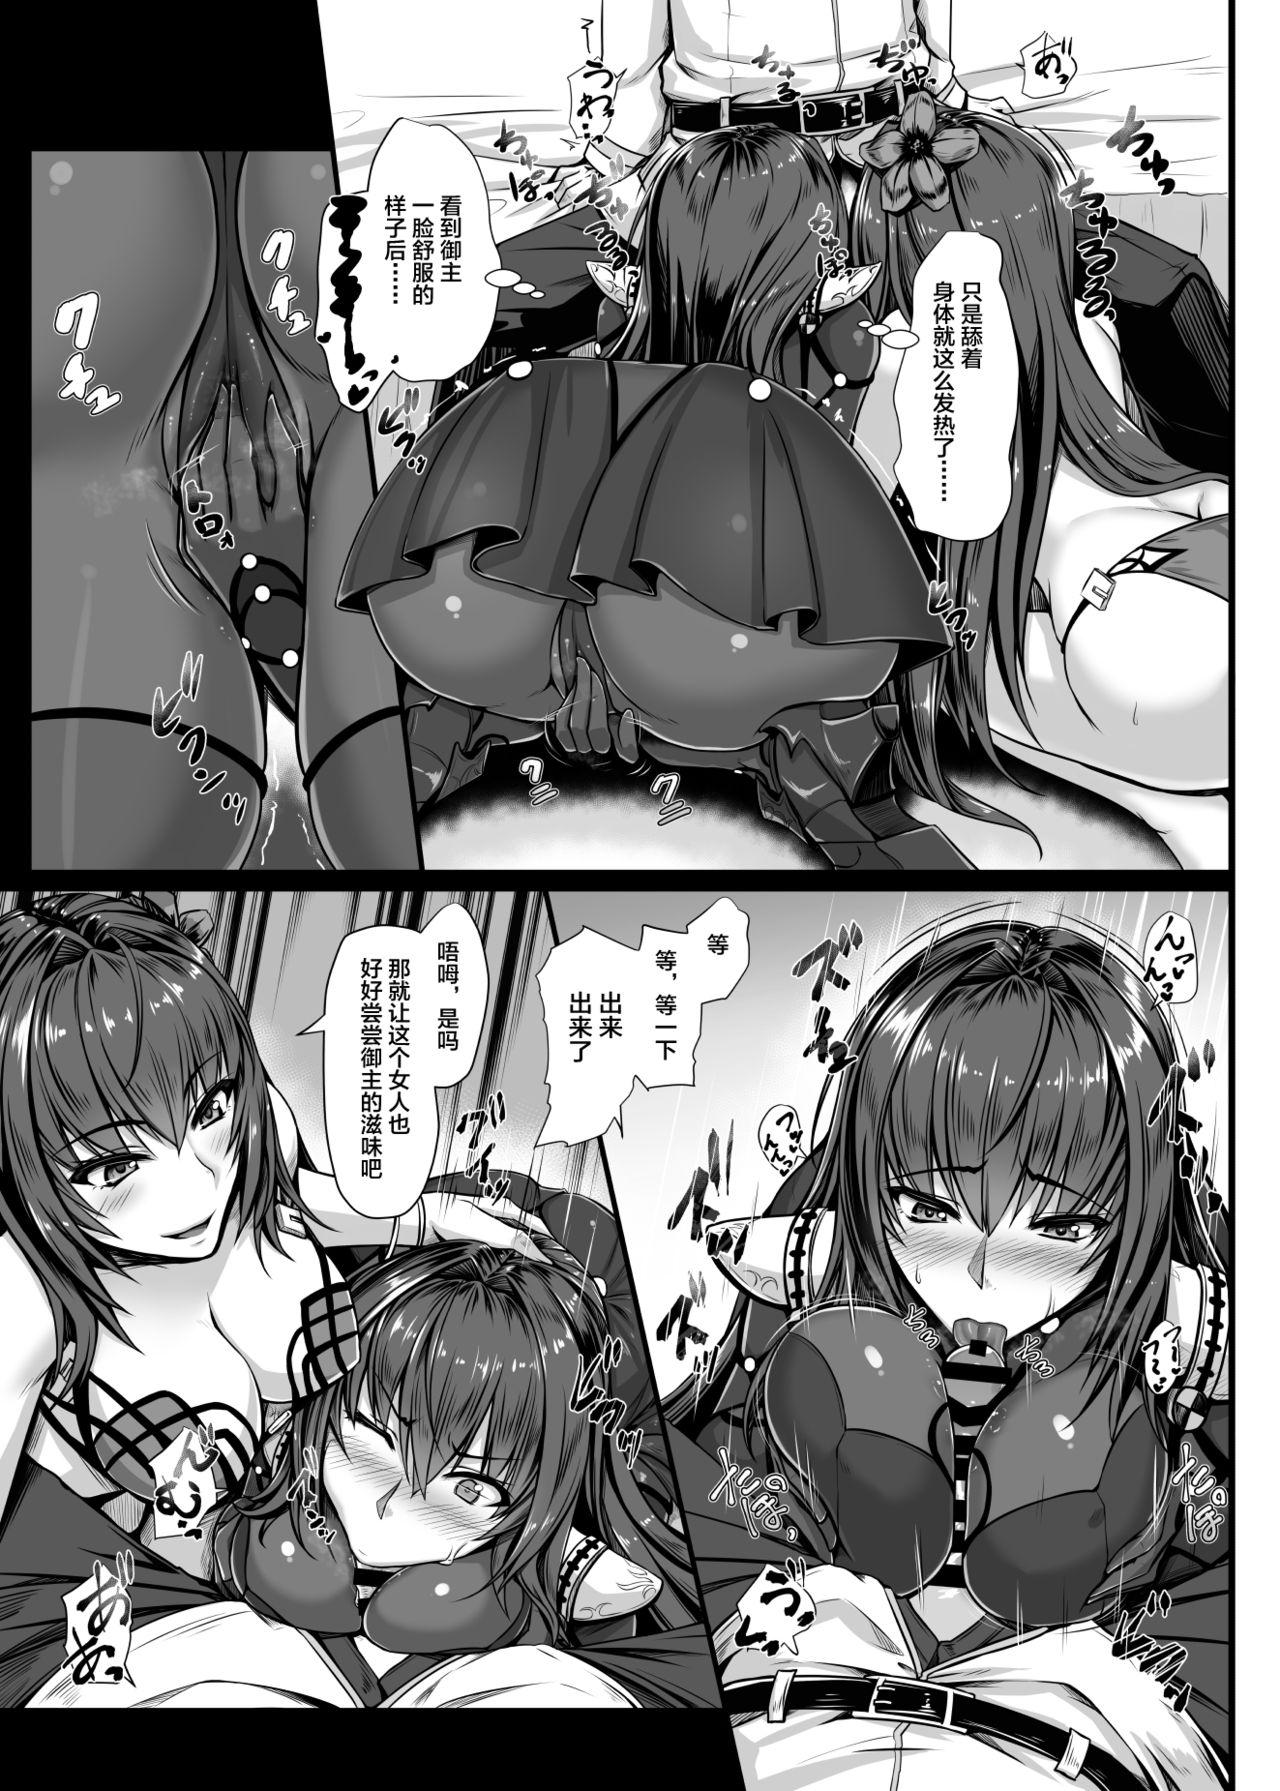 Girls Getting Fucked SSWX - Fate grand order Transgender - Page 9